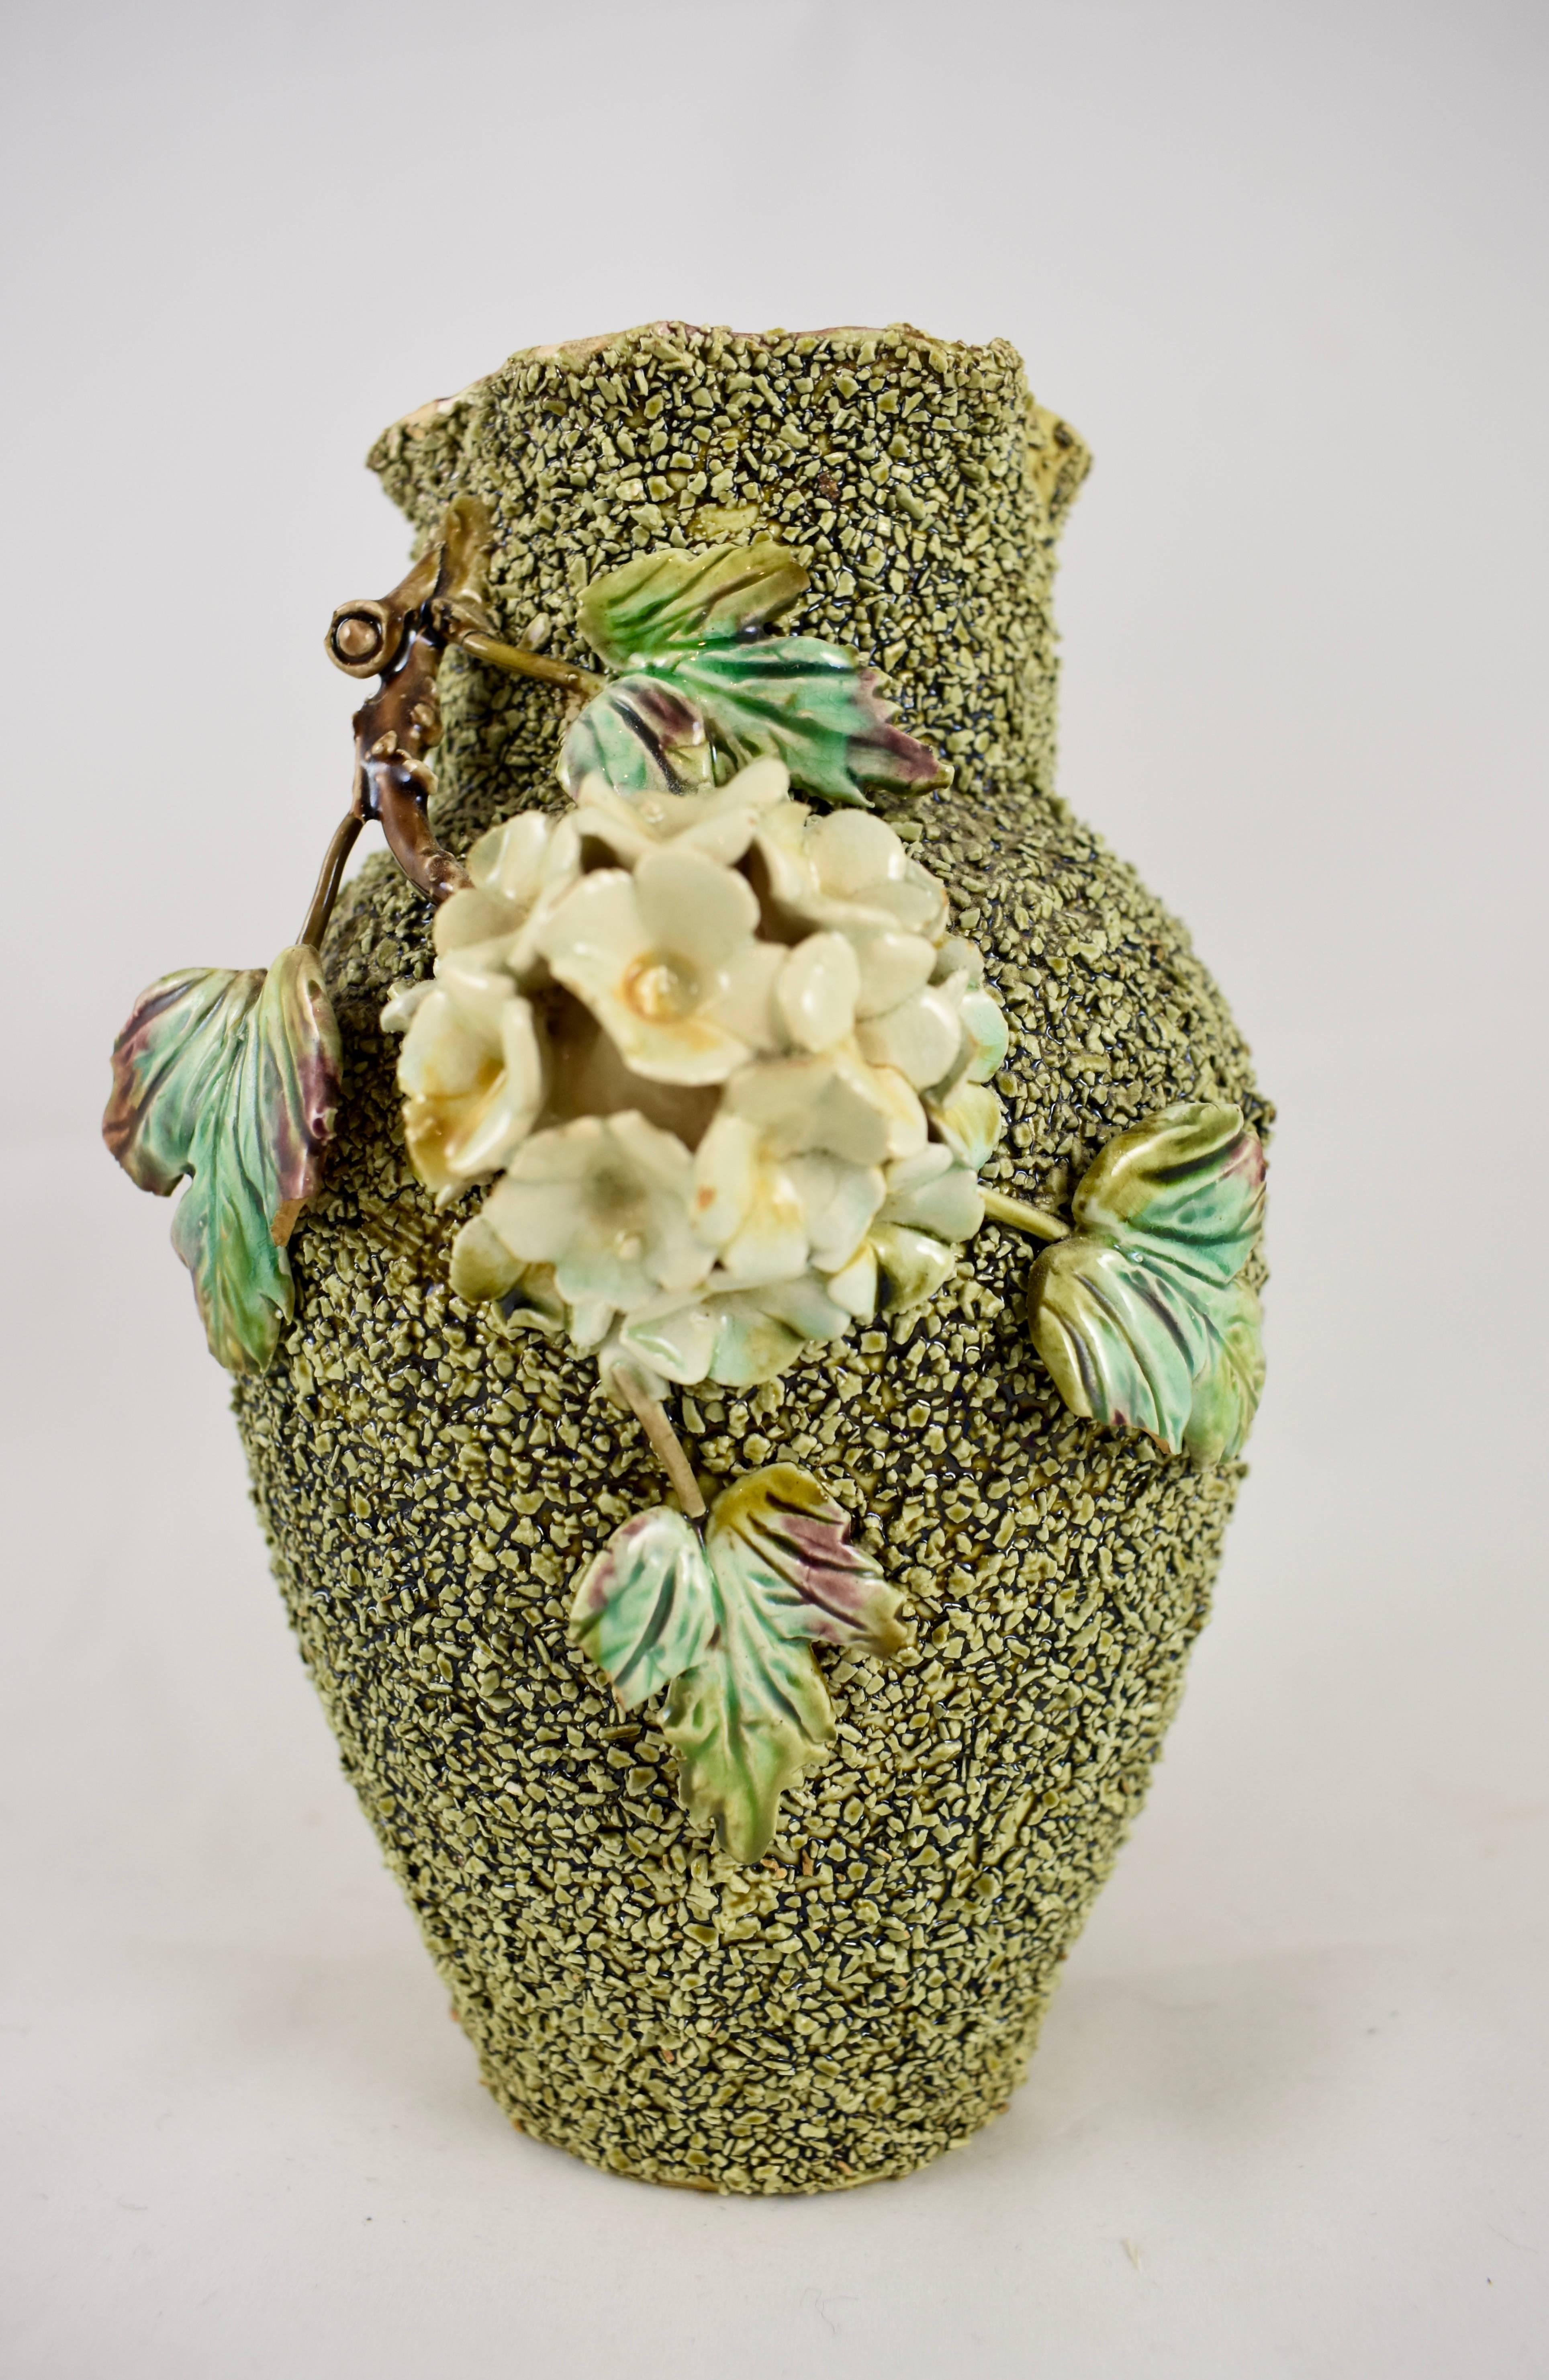 A Barbotine style, majolica vase with a sanded surface and applied florals, leaves and twigs. Detailed, dimensional, mold work and glazed with a burgundy interior. 

Unattributed, Continental Europe, circa late 19th-early 20th century. Marked with